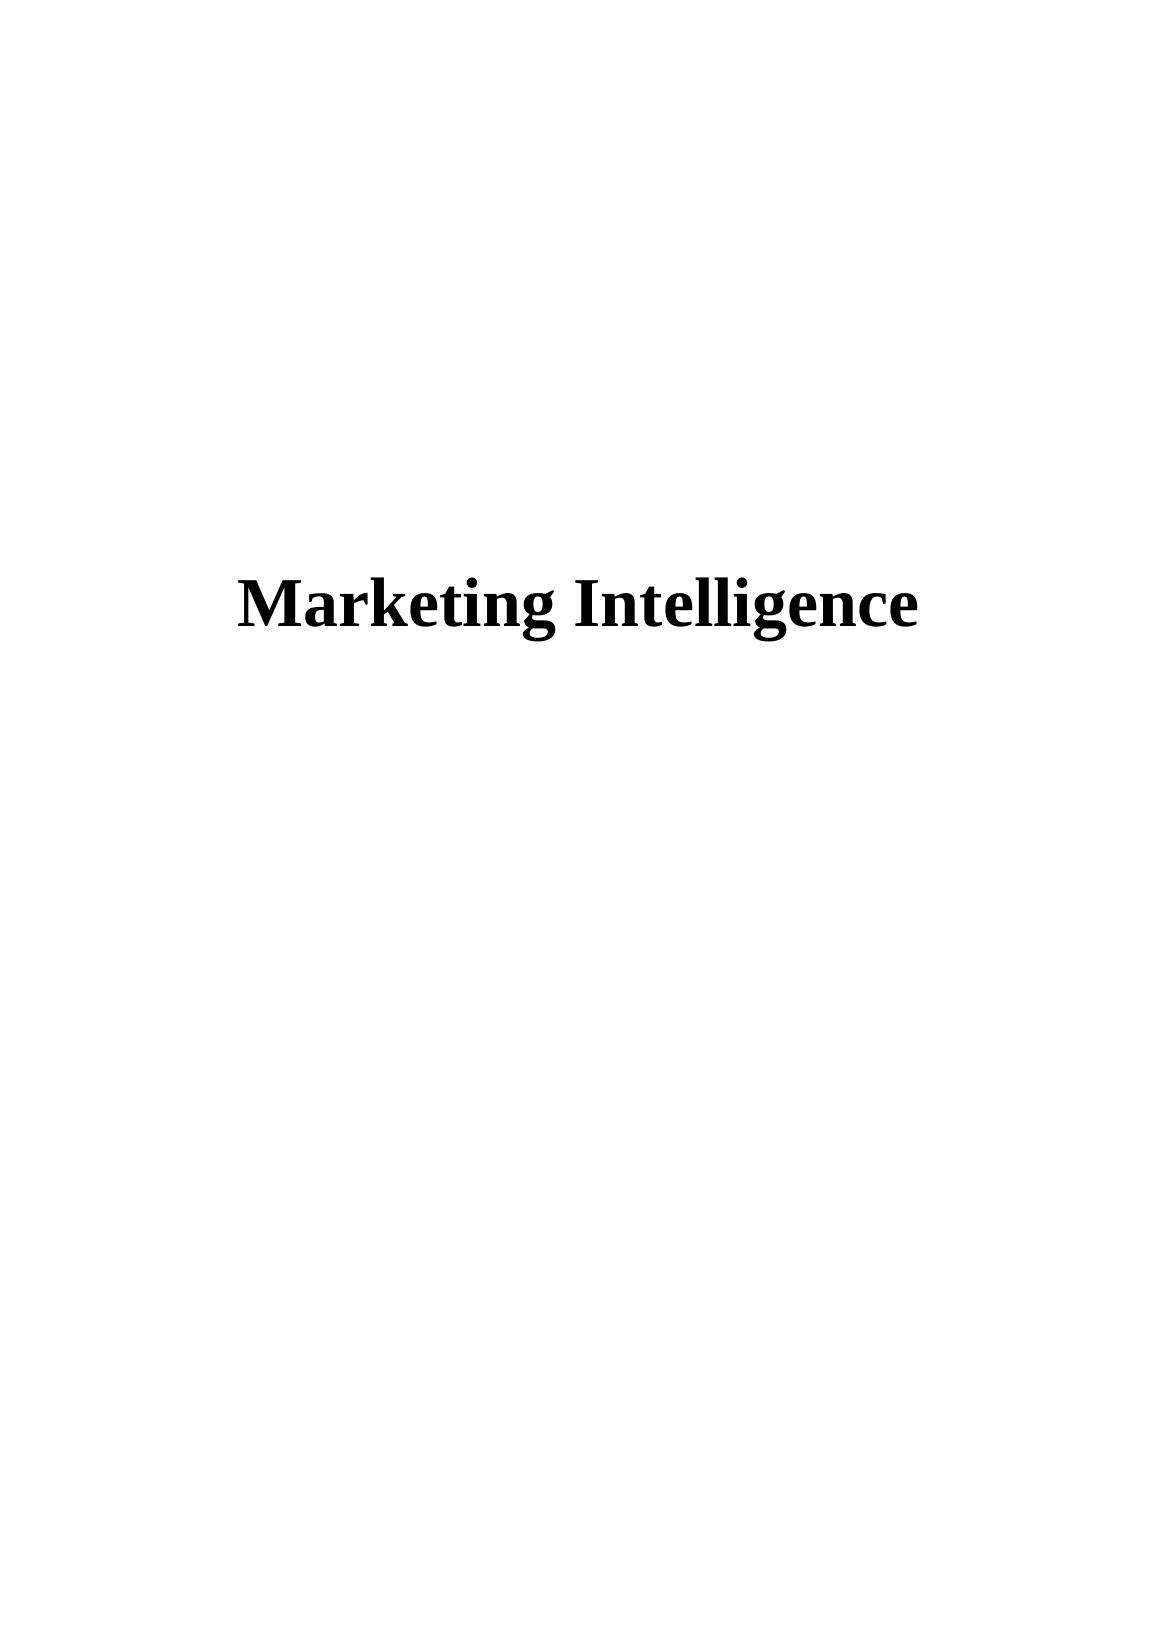 Report on Marketing Essential of Tesco_1